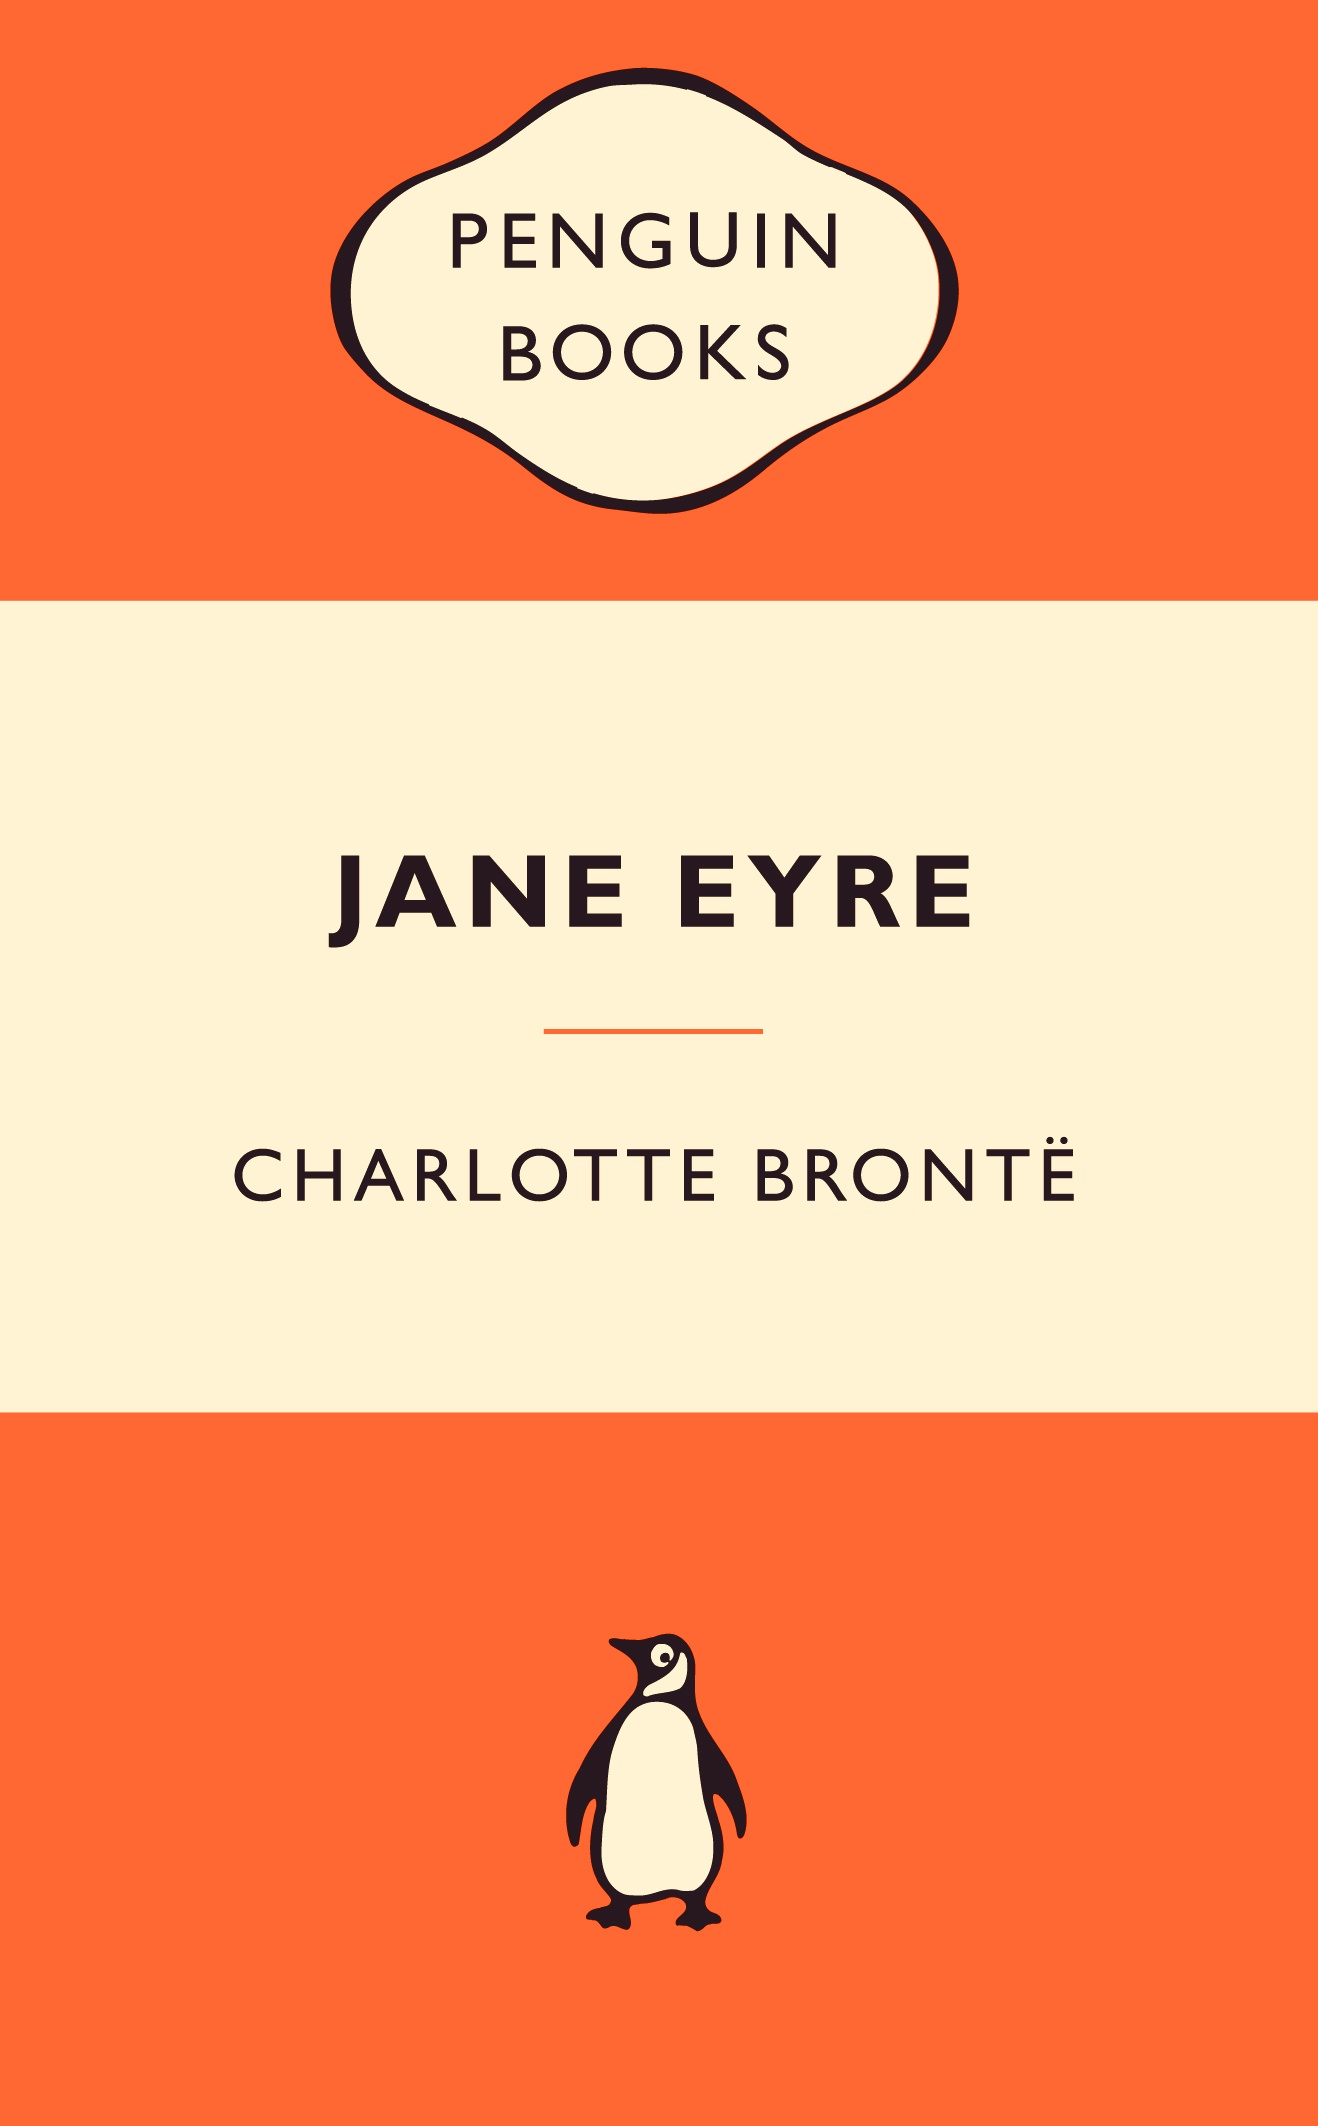 How to write jane eyre